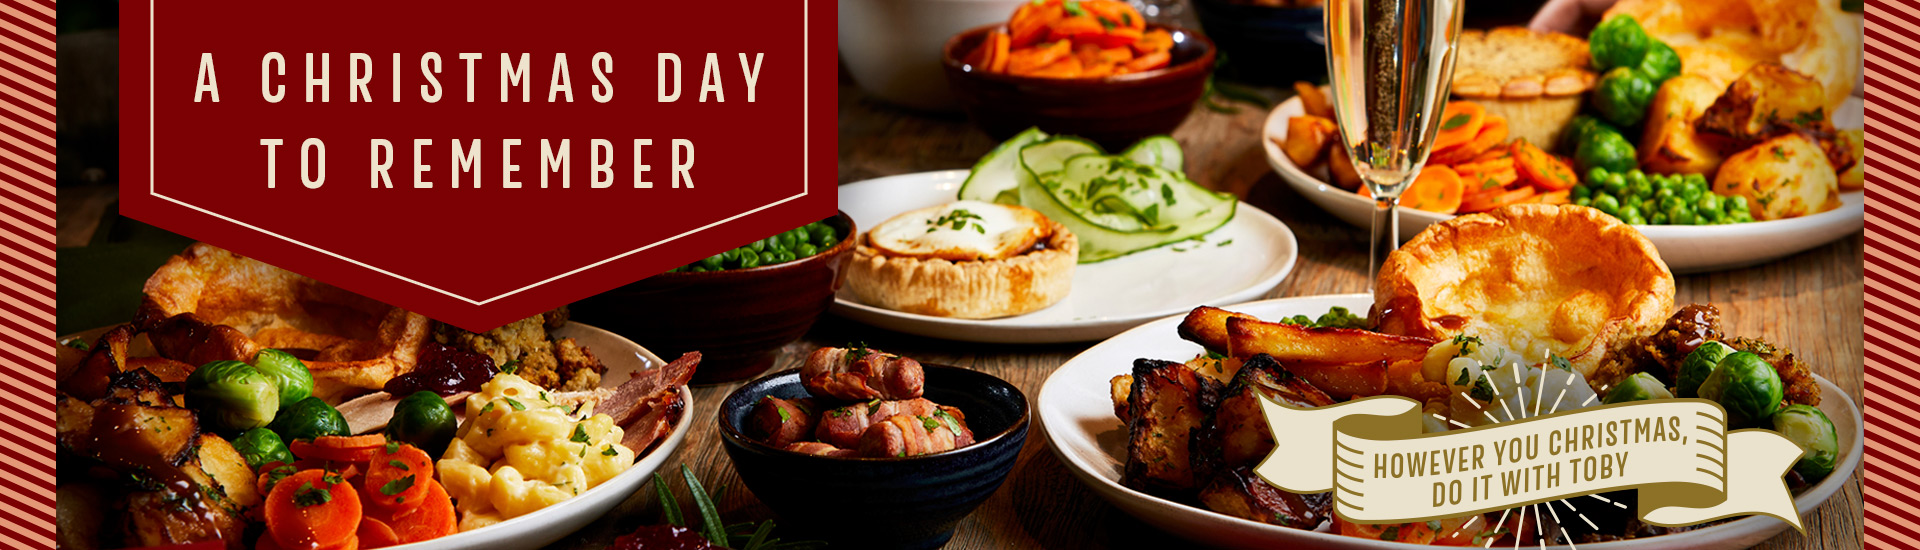 Christmas Day menu at Toby Carvery Ipswich